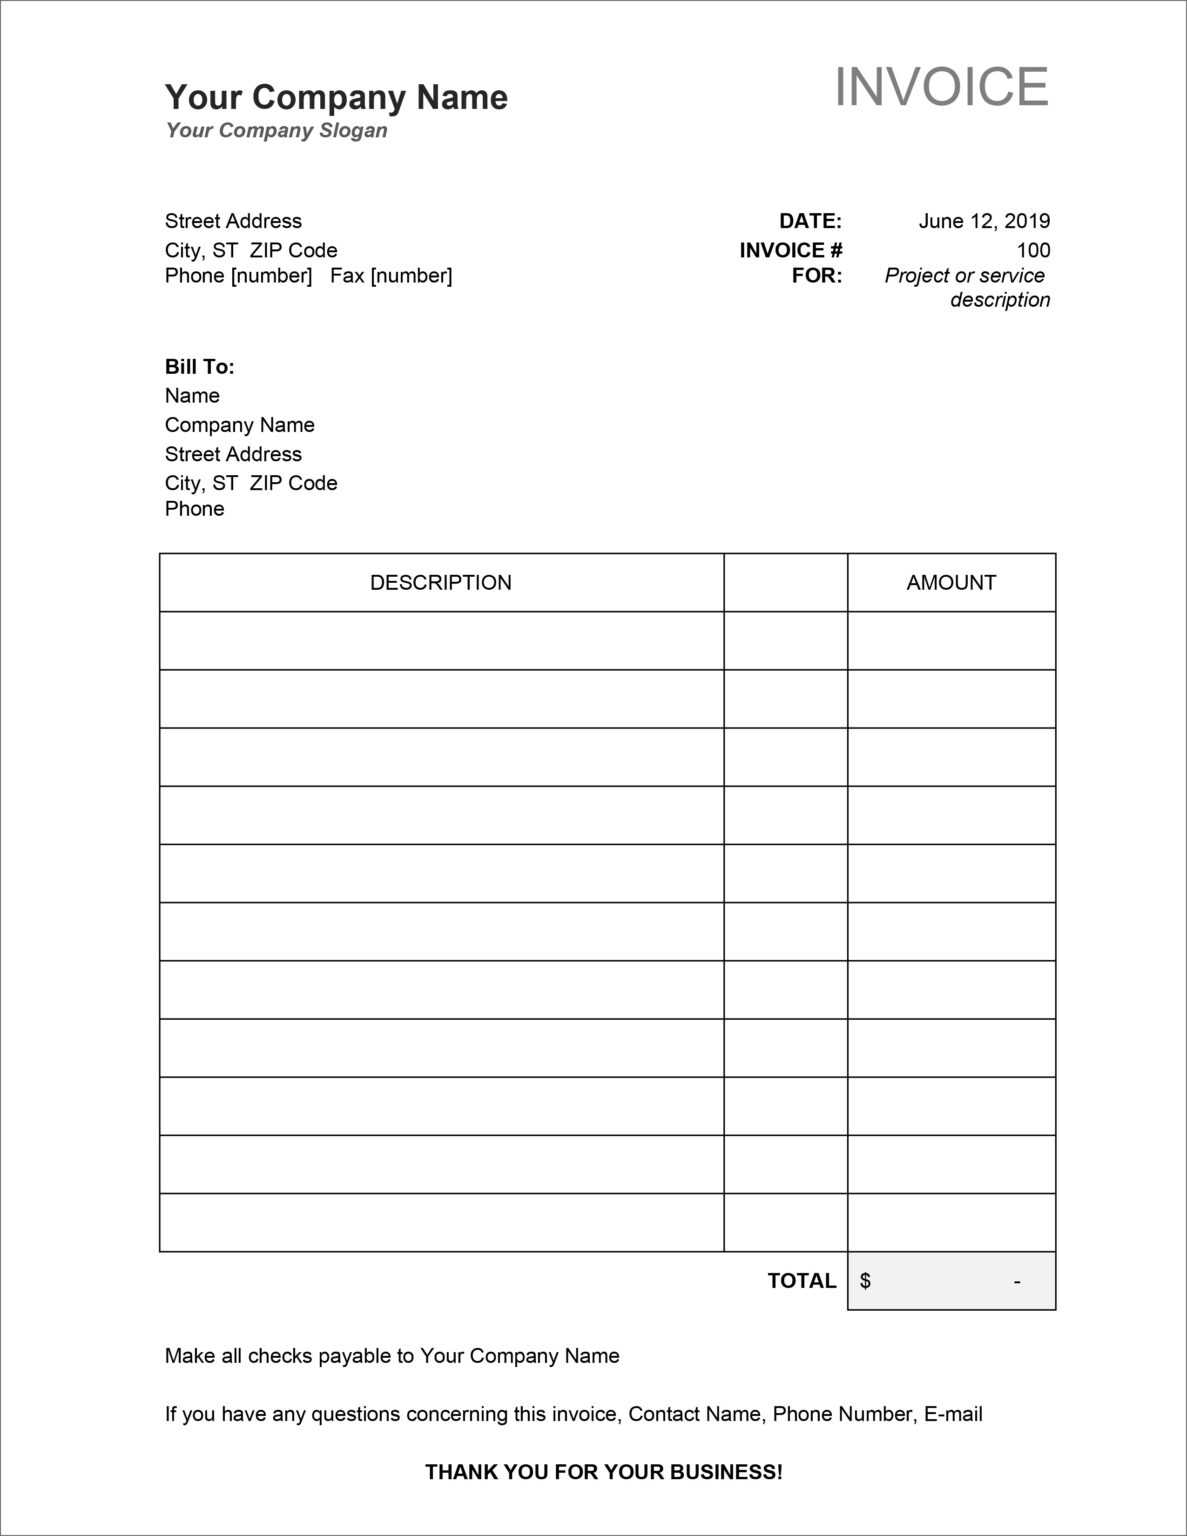 windows excel free invoice template download